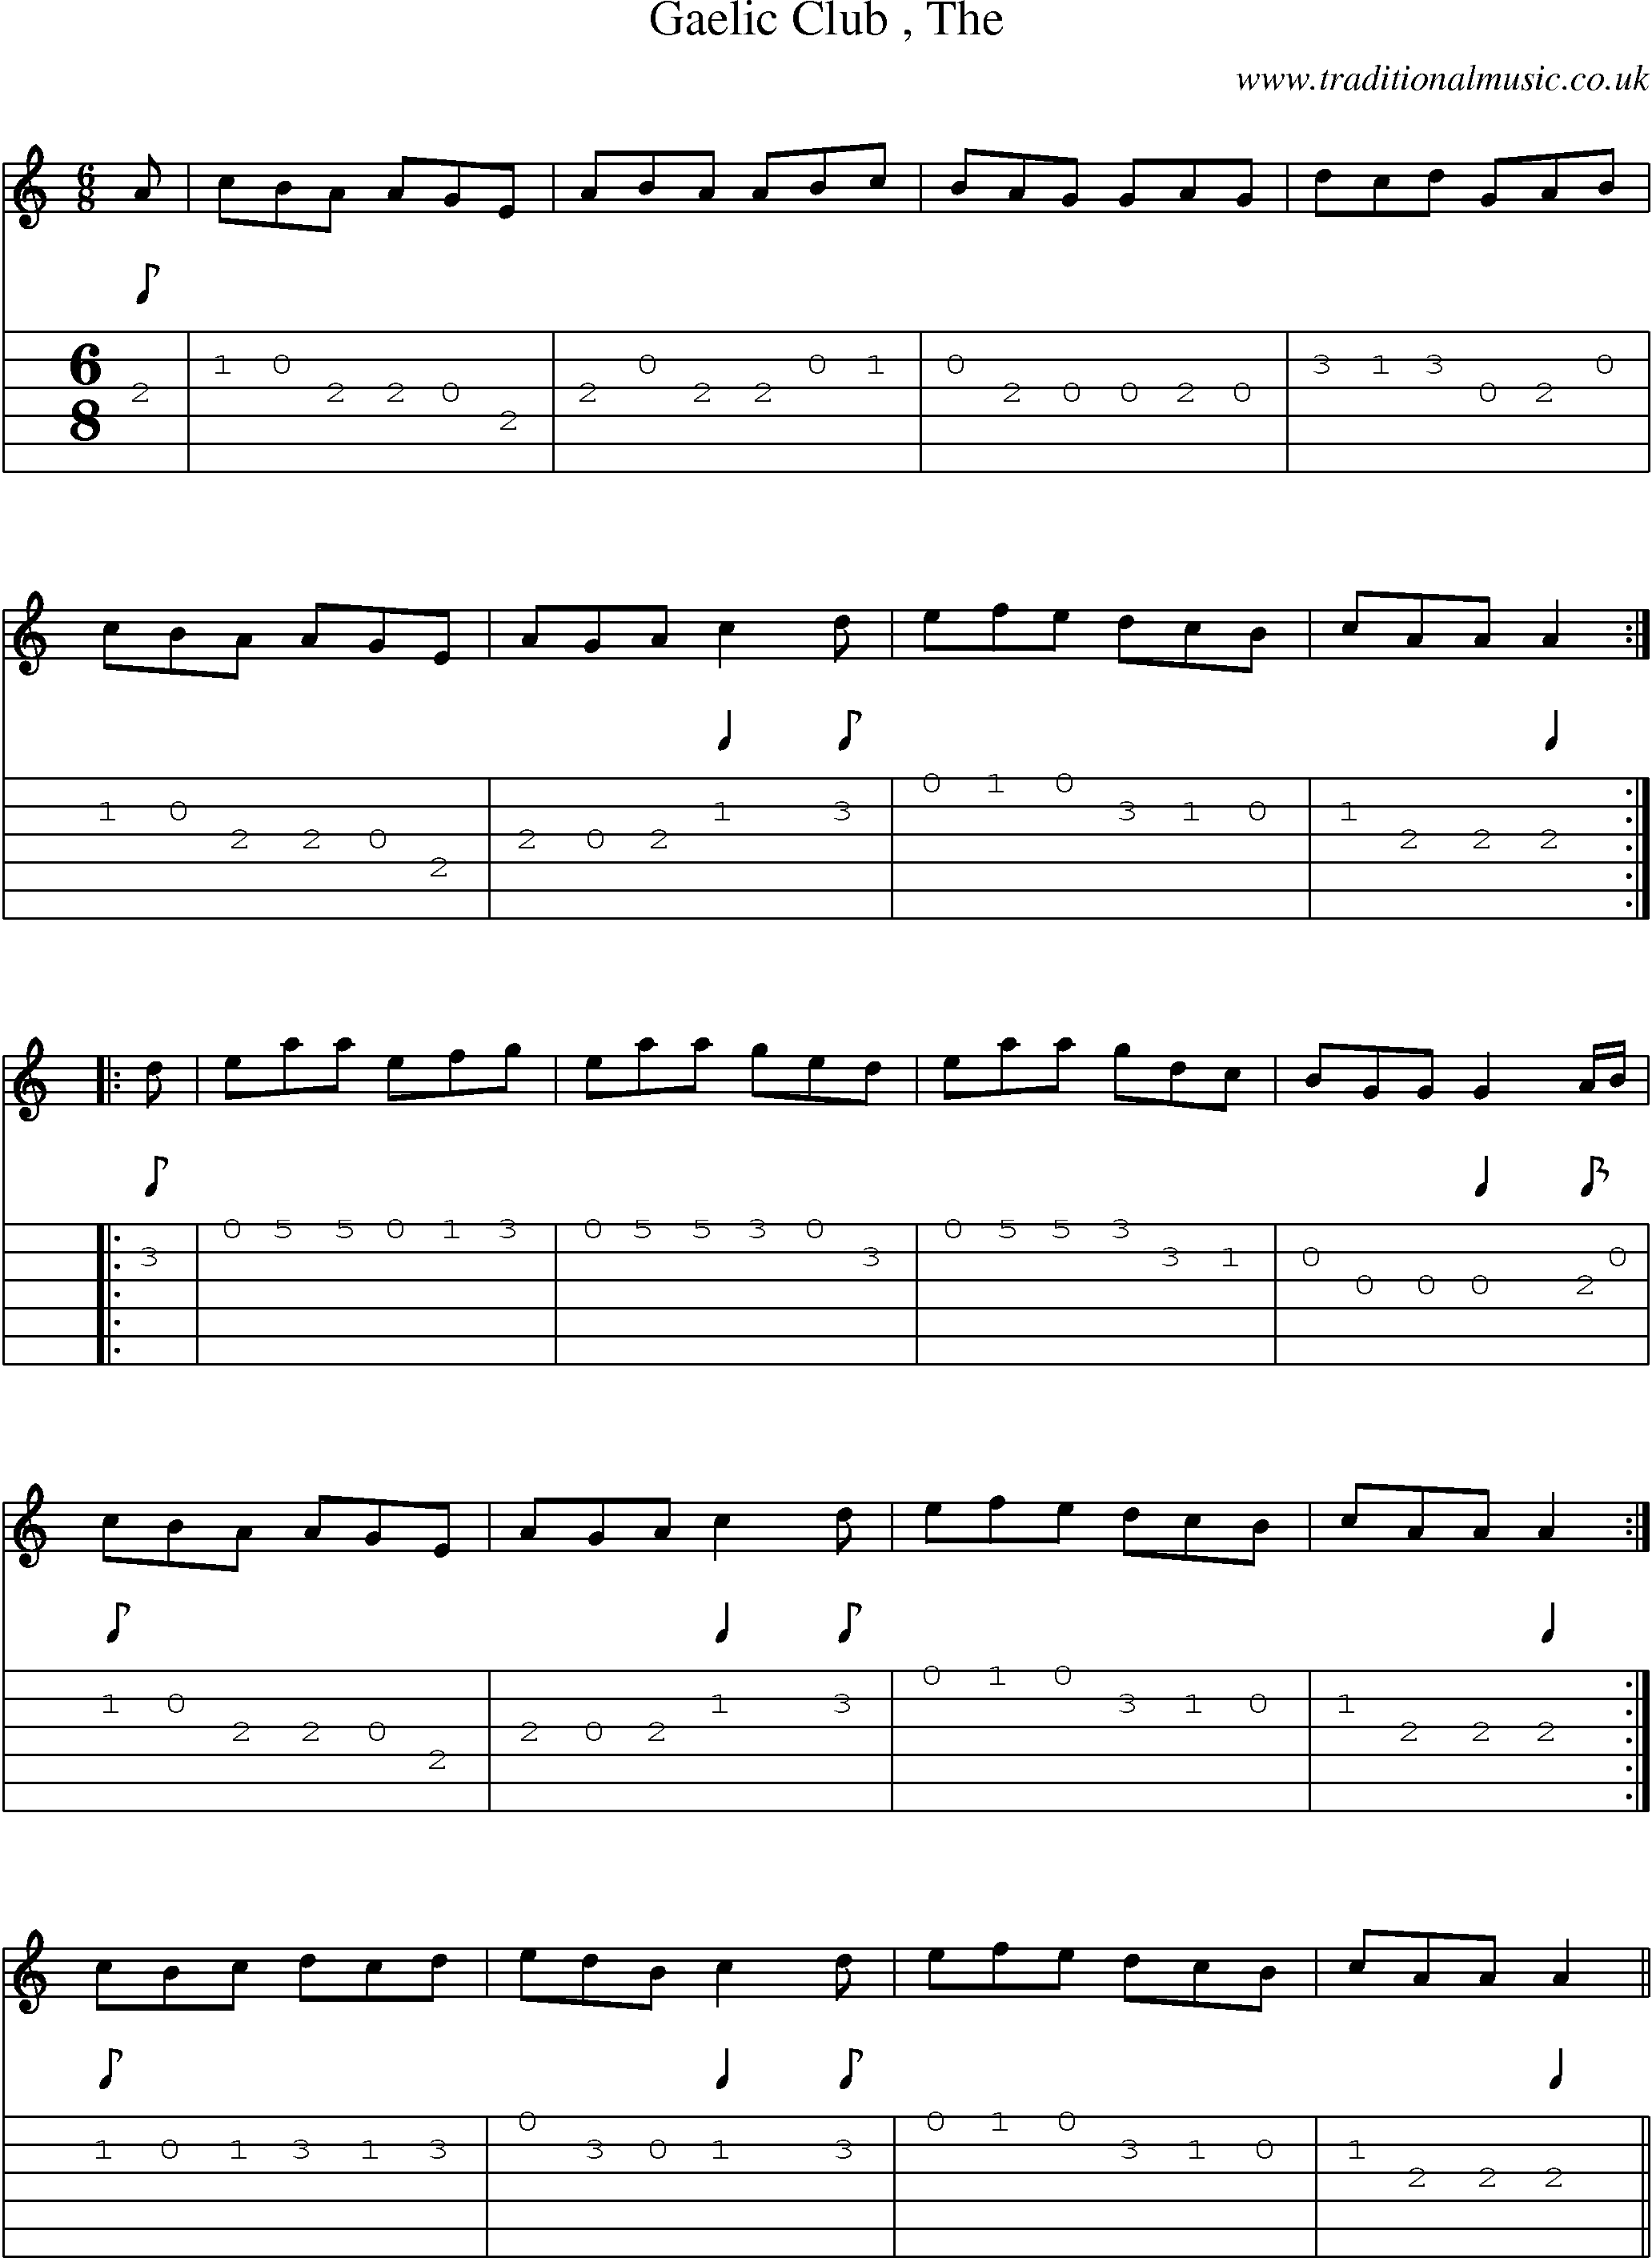 Music Score and Guitar Tabs for Gaelic Club